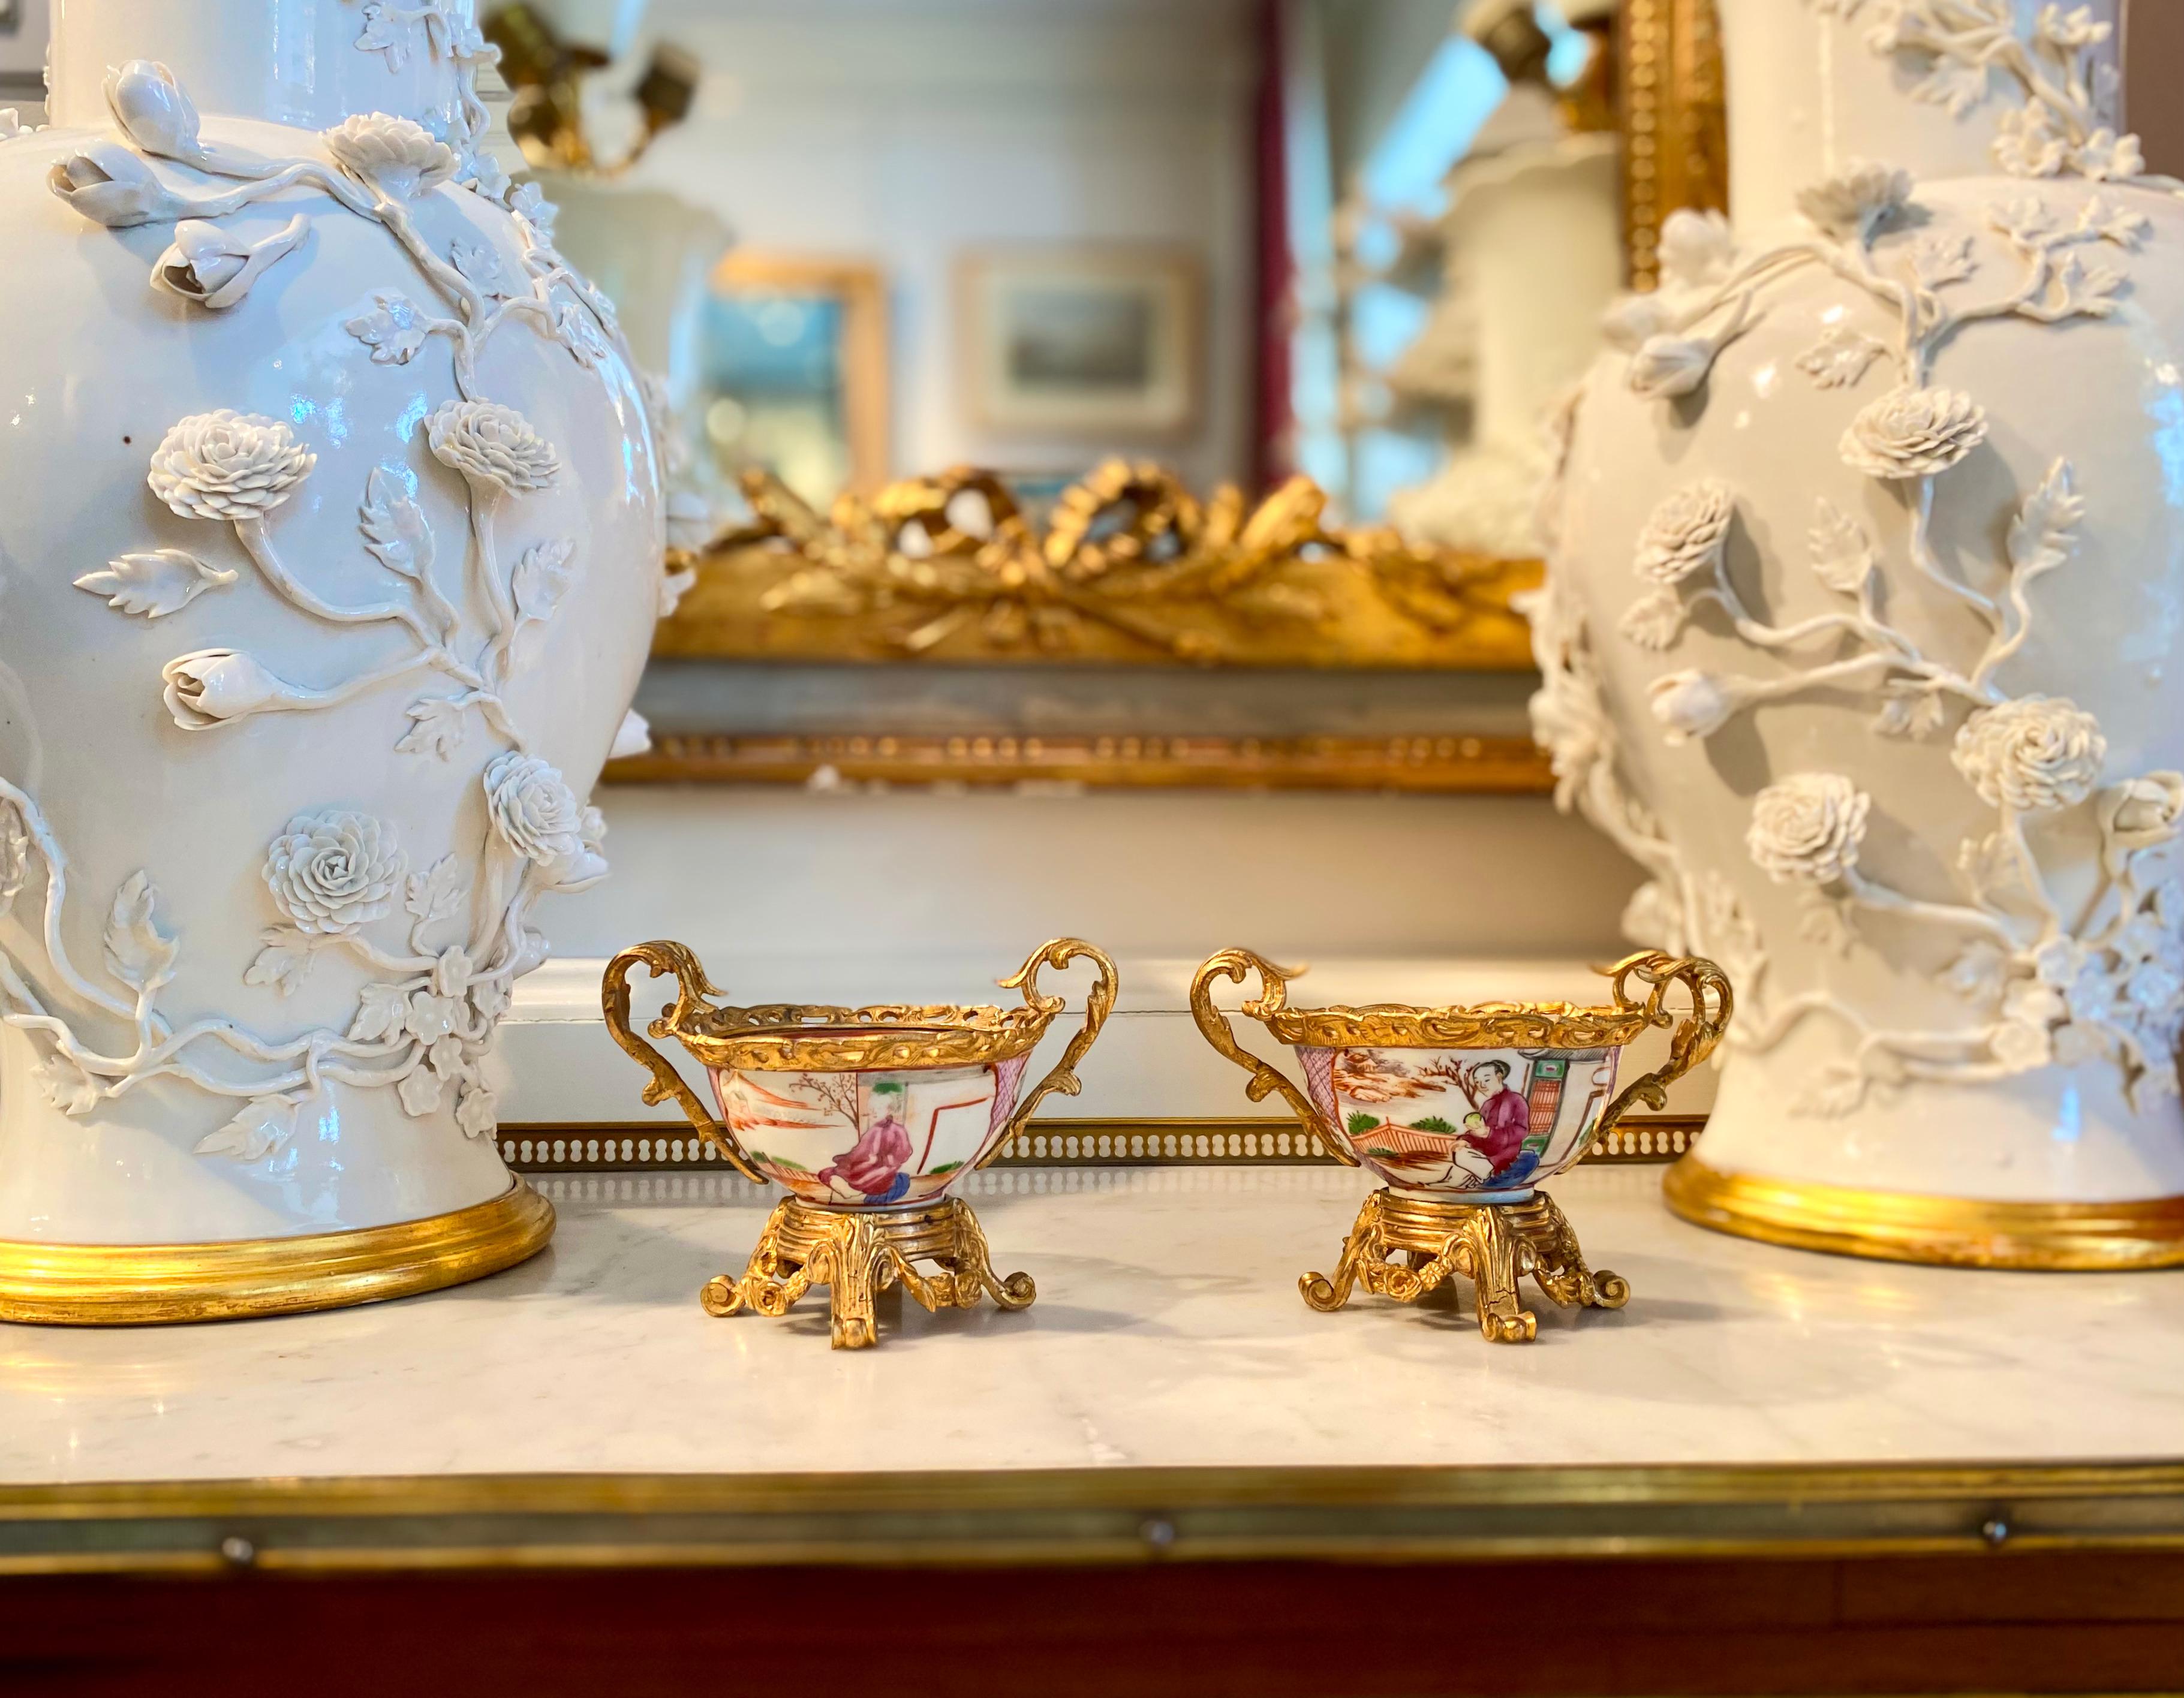 French, 18th century, Louis XV, ormolu mounted pair of Chinese teacups. In an age when France was enamored of all things oriental, fine Chinese porcelain was often mounted in gilt bronze, and decorative vessels were repurposed as potpourri vases,